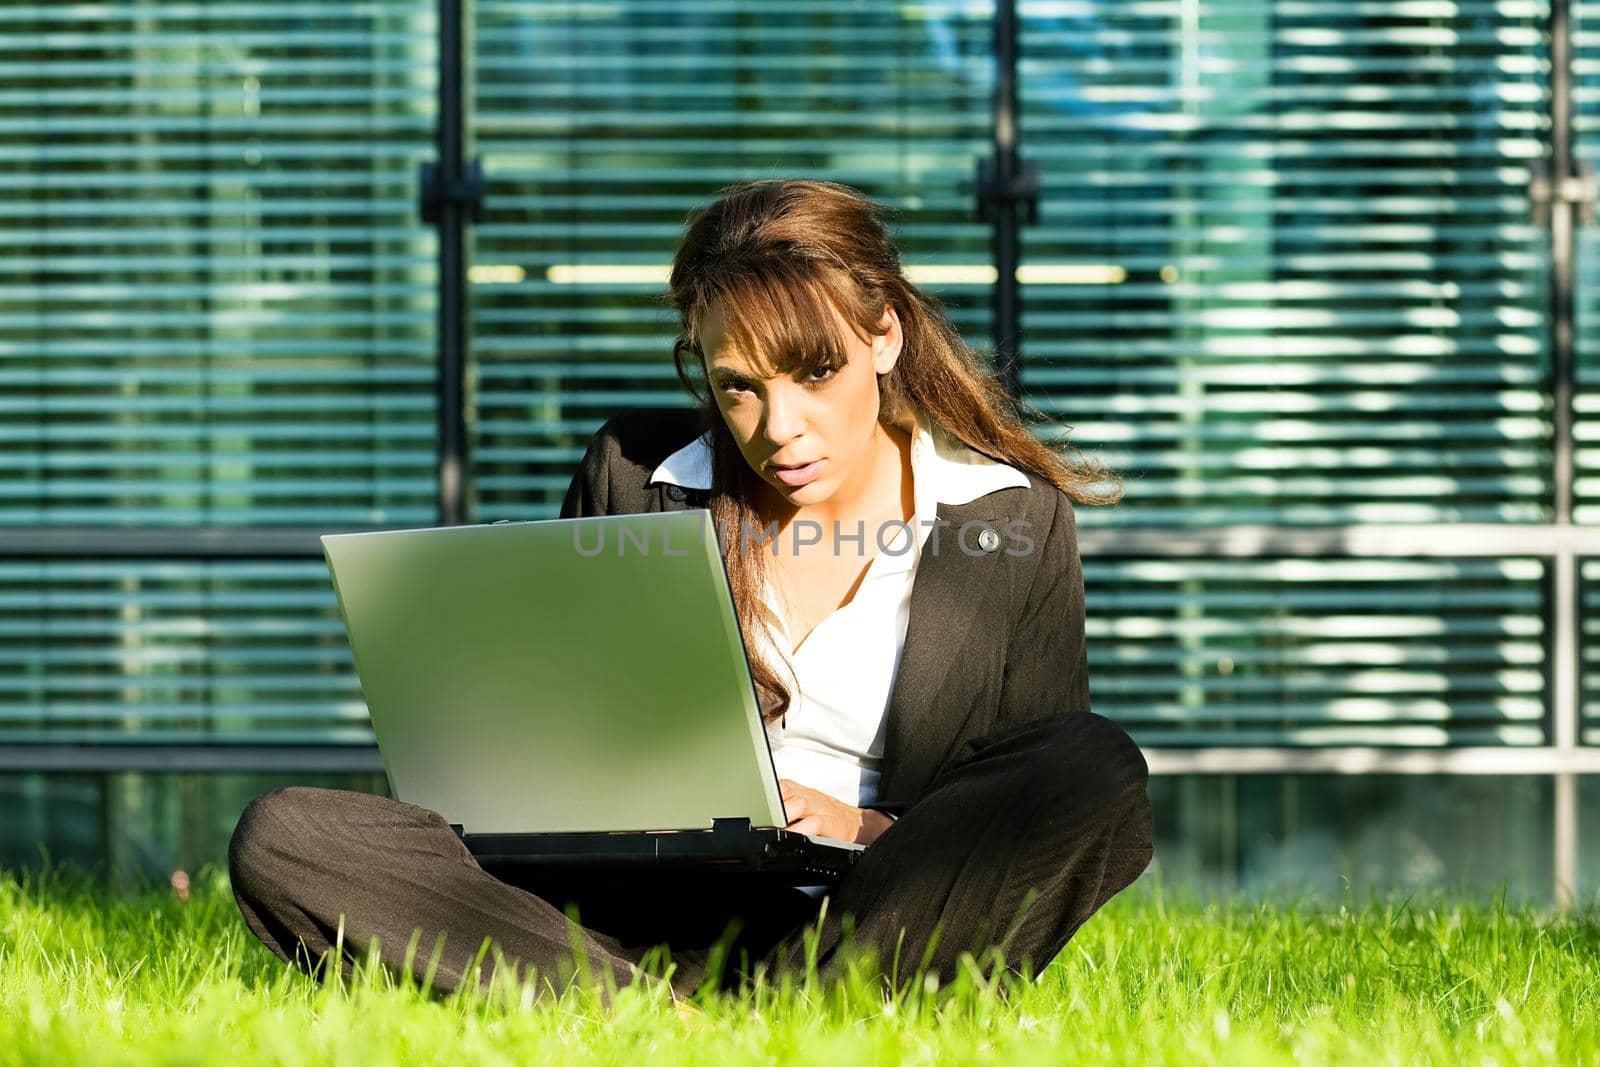 A female professional sitting with her laptop on the lawn